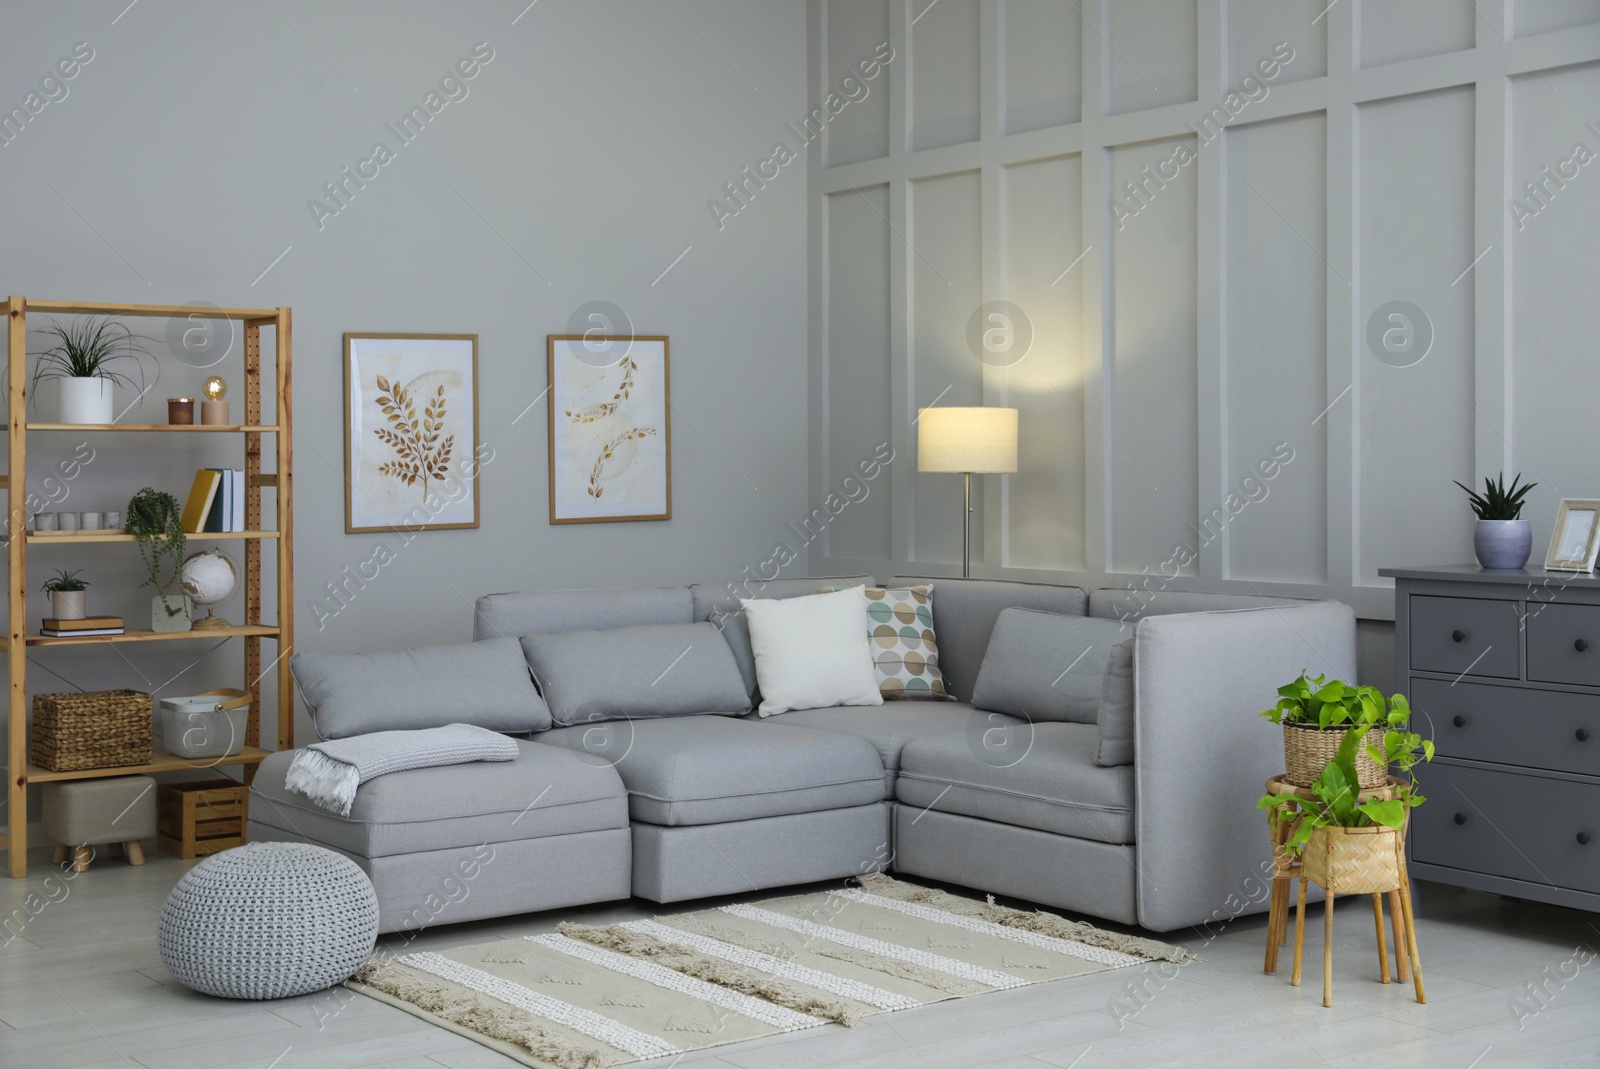 Photo of stylish living room interior with comfortable grey sofa and plants